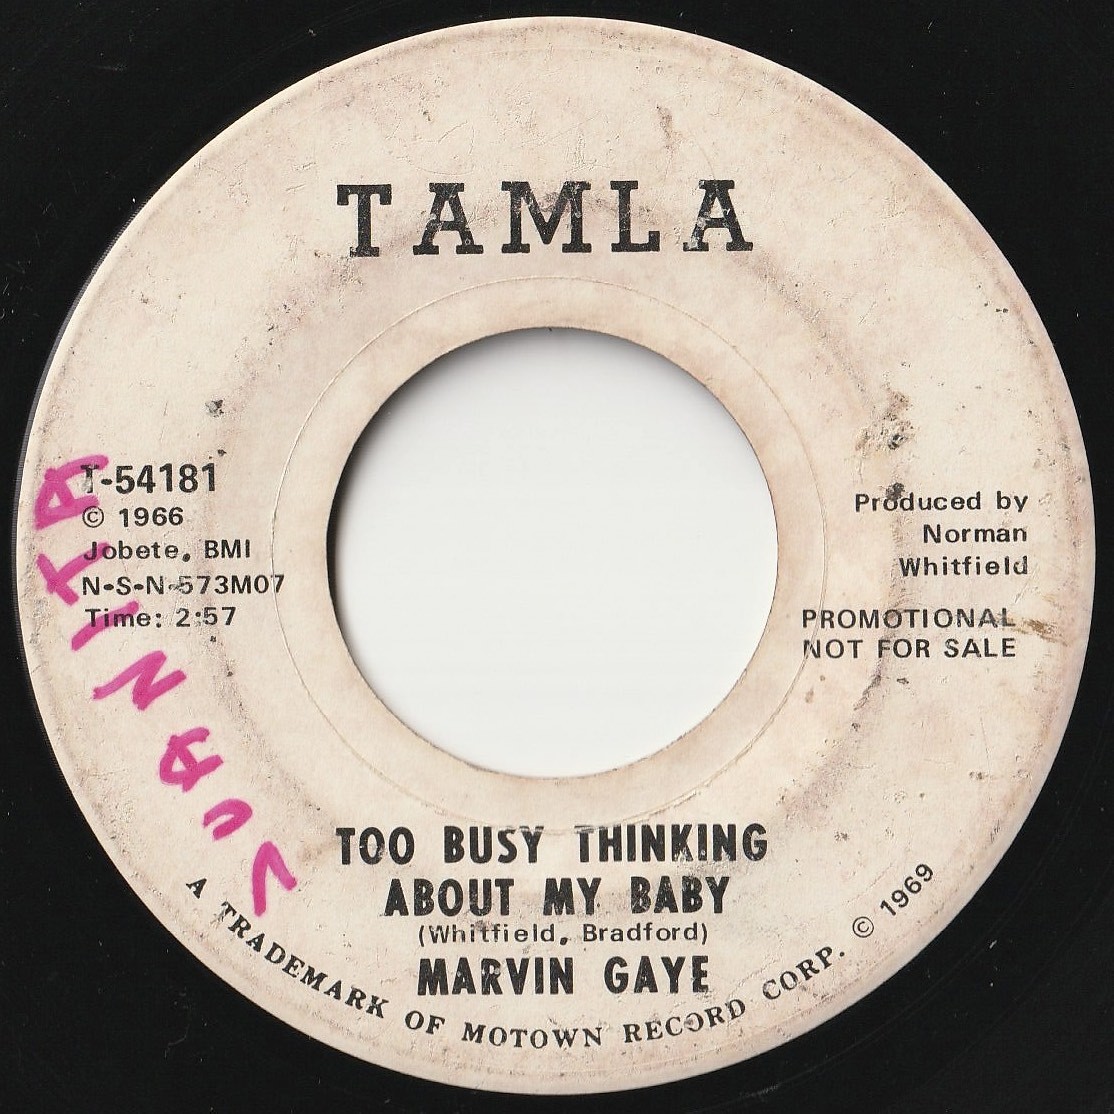 Marvin Gaye Too Busy Thinking About My Baby Tamla US T-54181 202091 SOUL ソウル レコード 7インチ 45_画像1